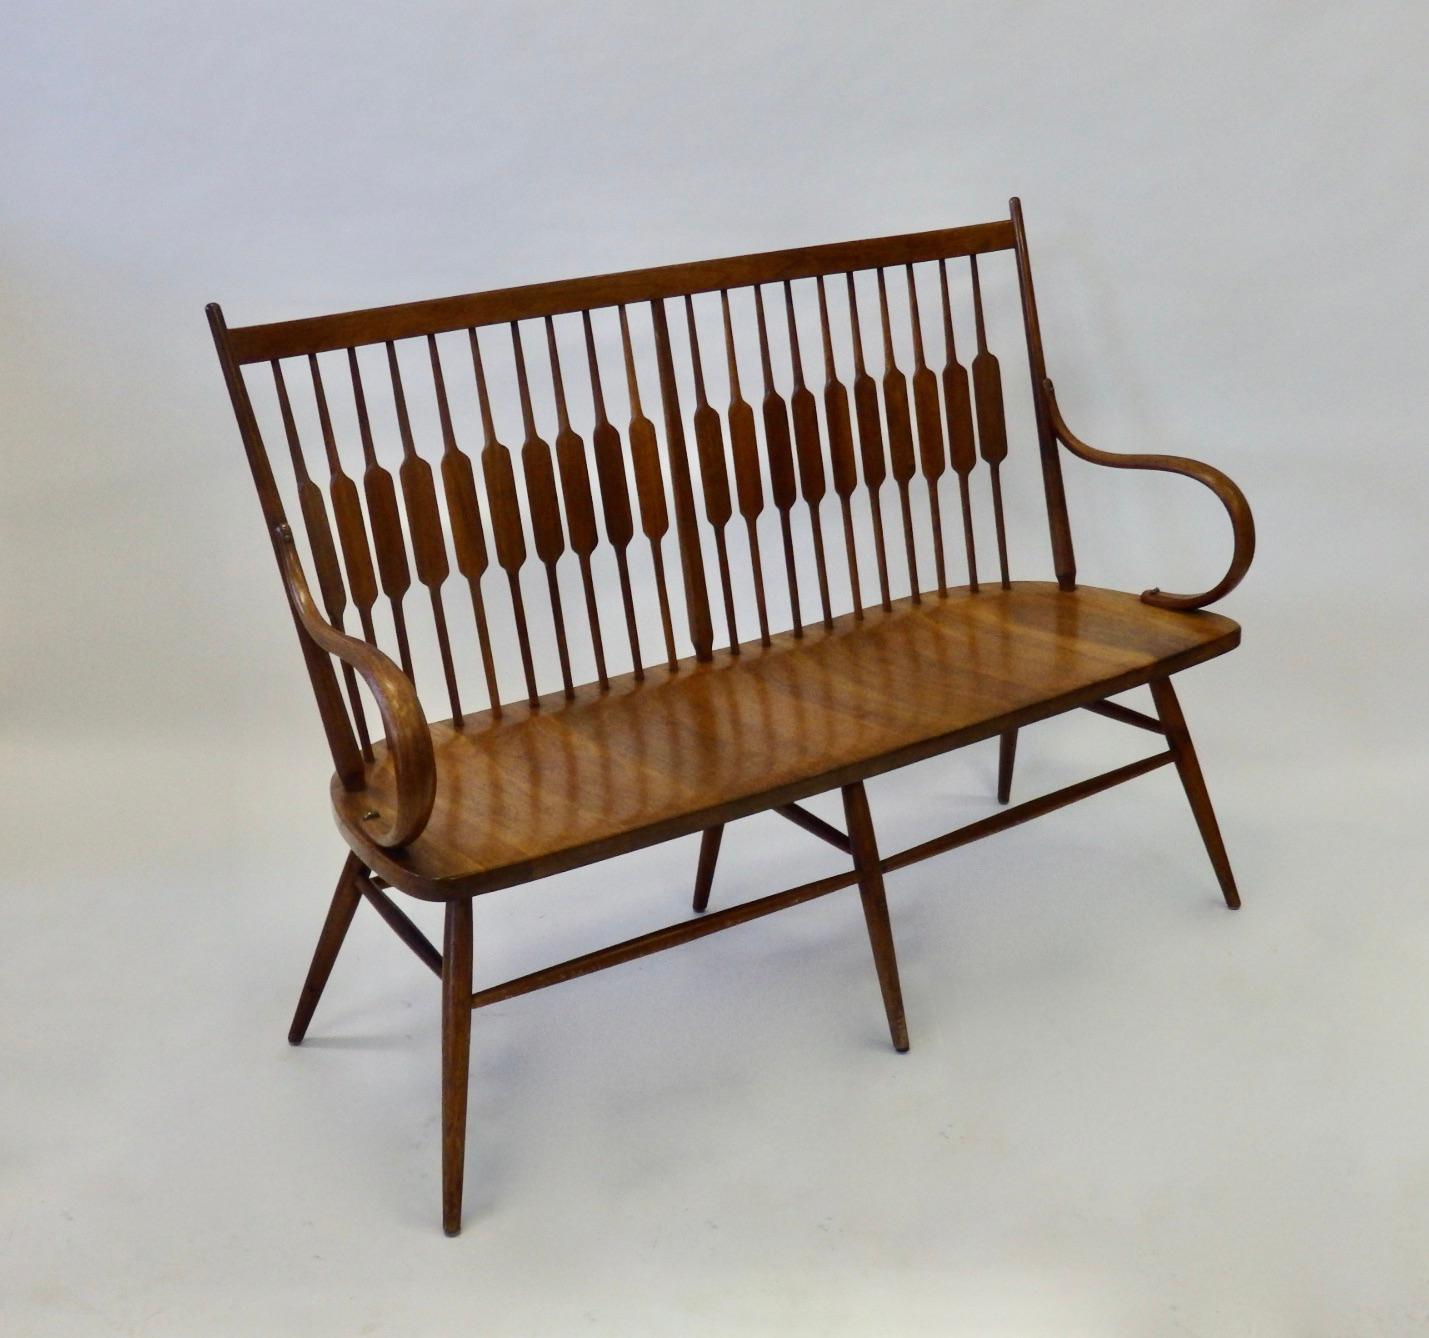 American Colonial Kipp Stewart for Drexel Modernist Slat Back Bench or Settee with Steam Bent Arms